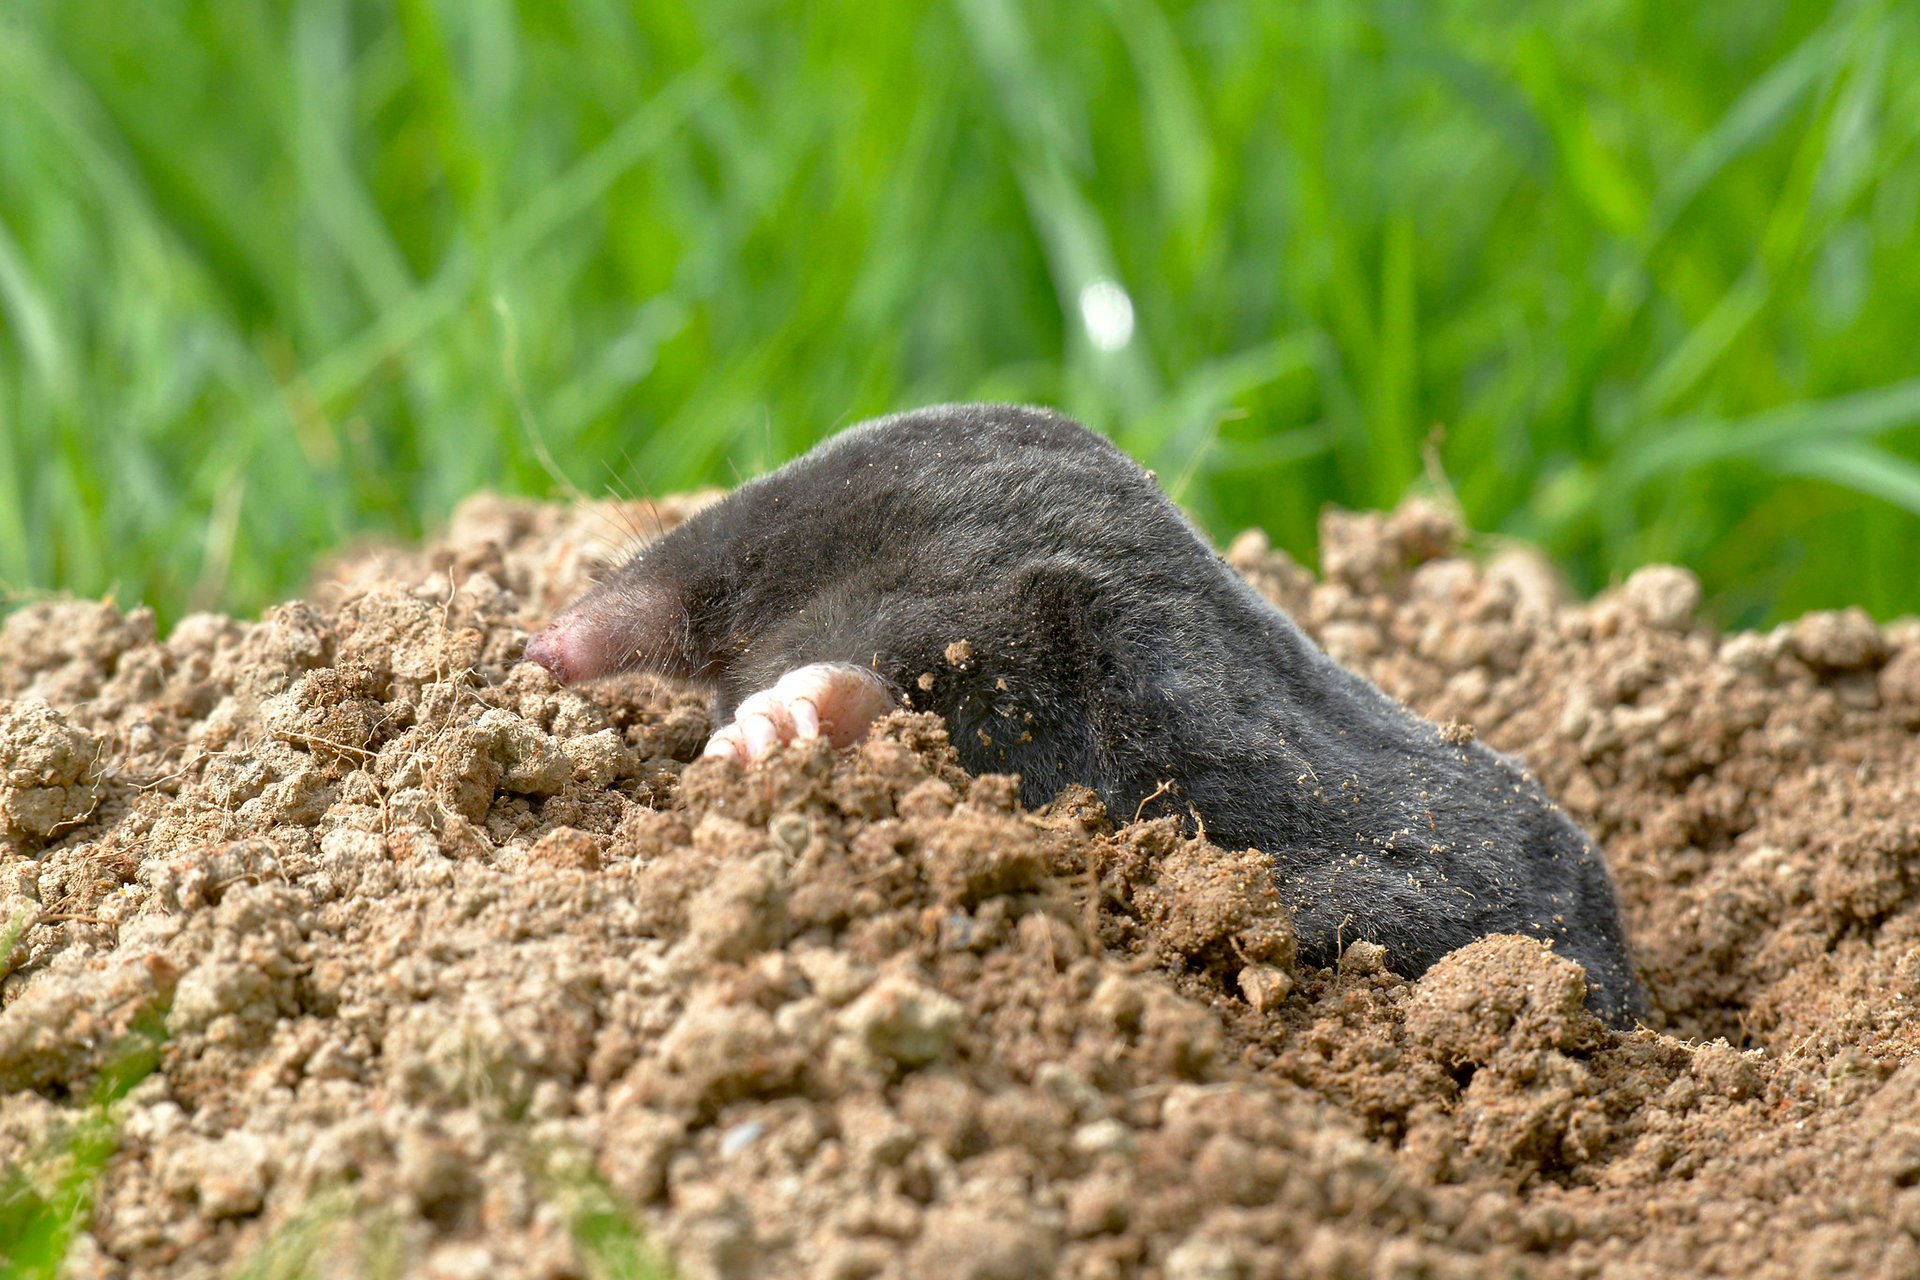 Mole emerging from the ground